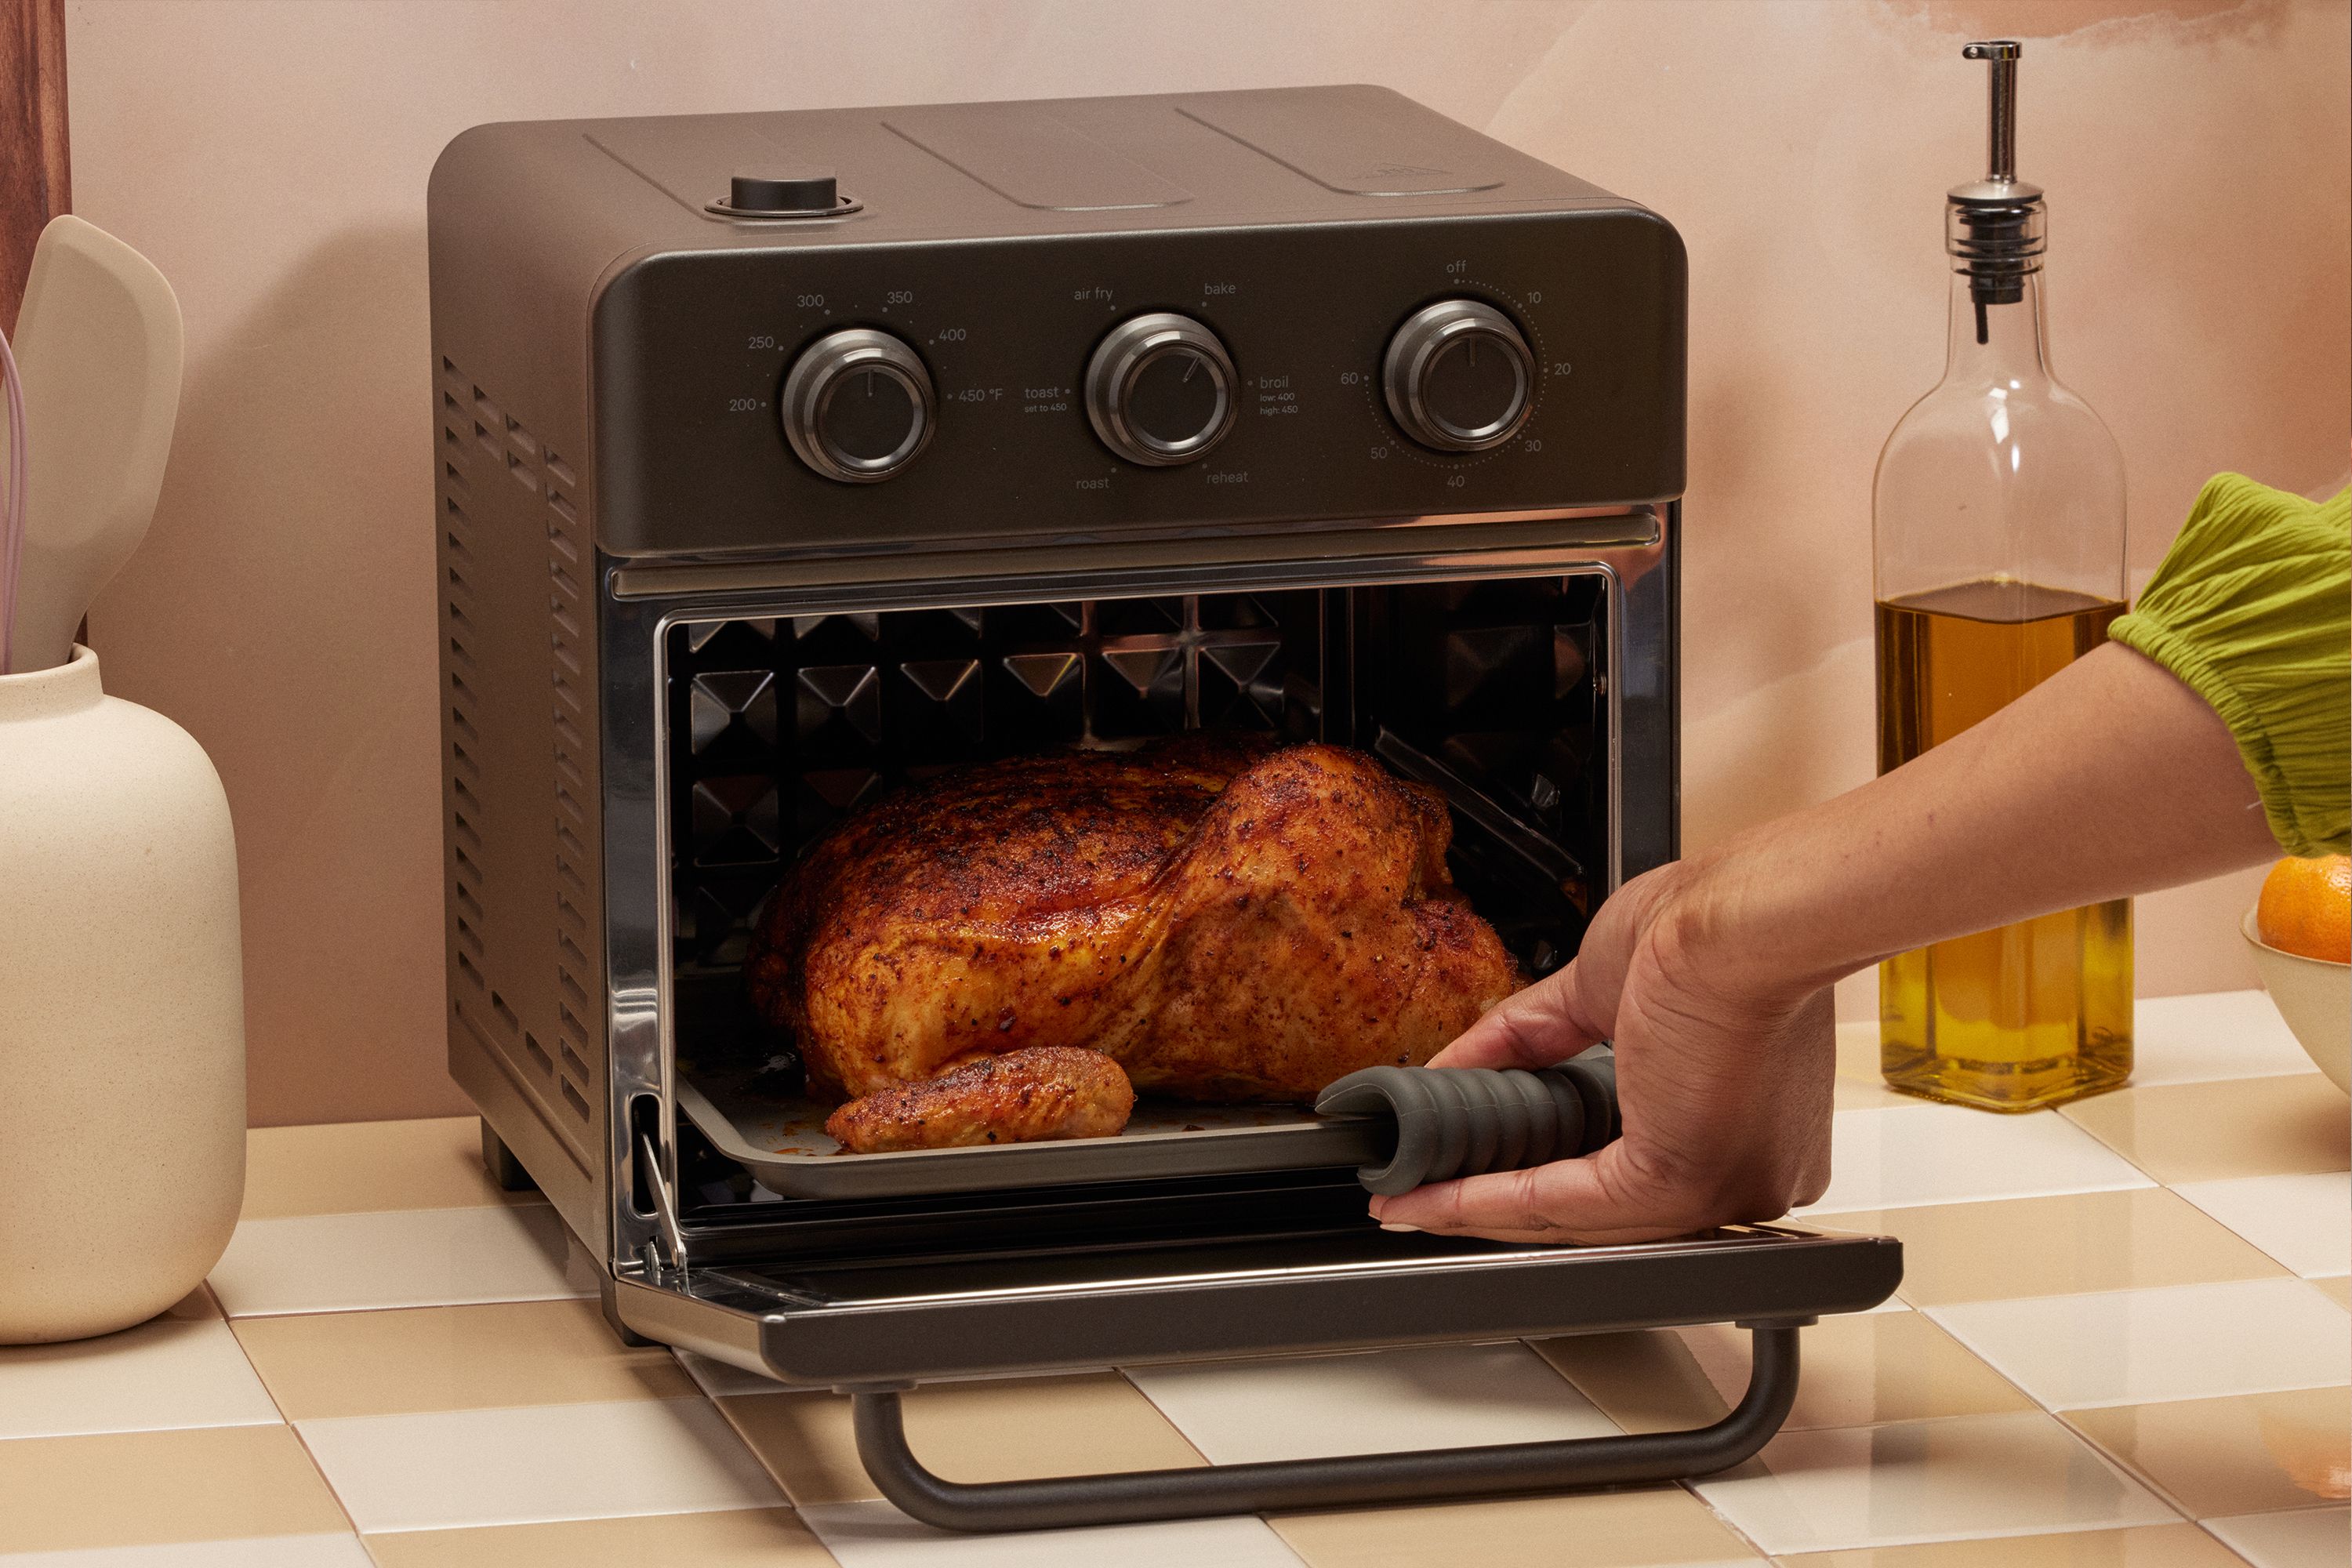 Our Place Wonder Oven Review 2023 - PureWow